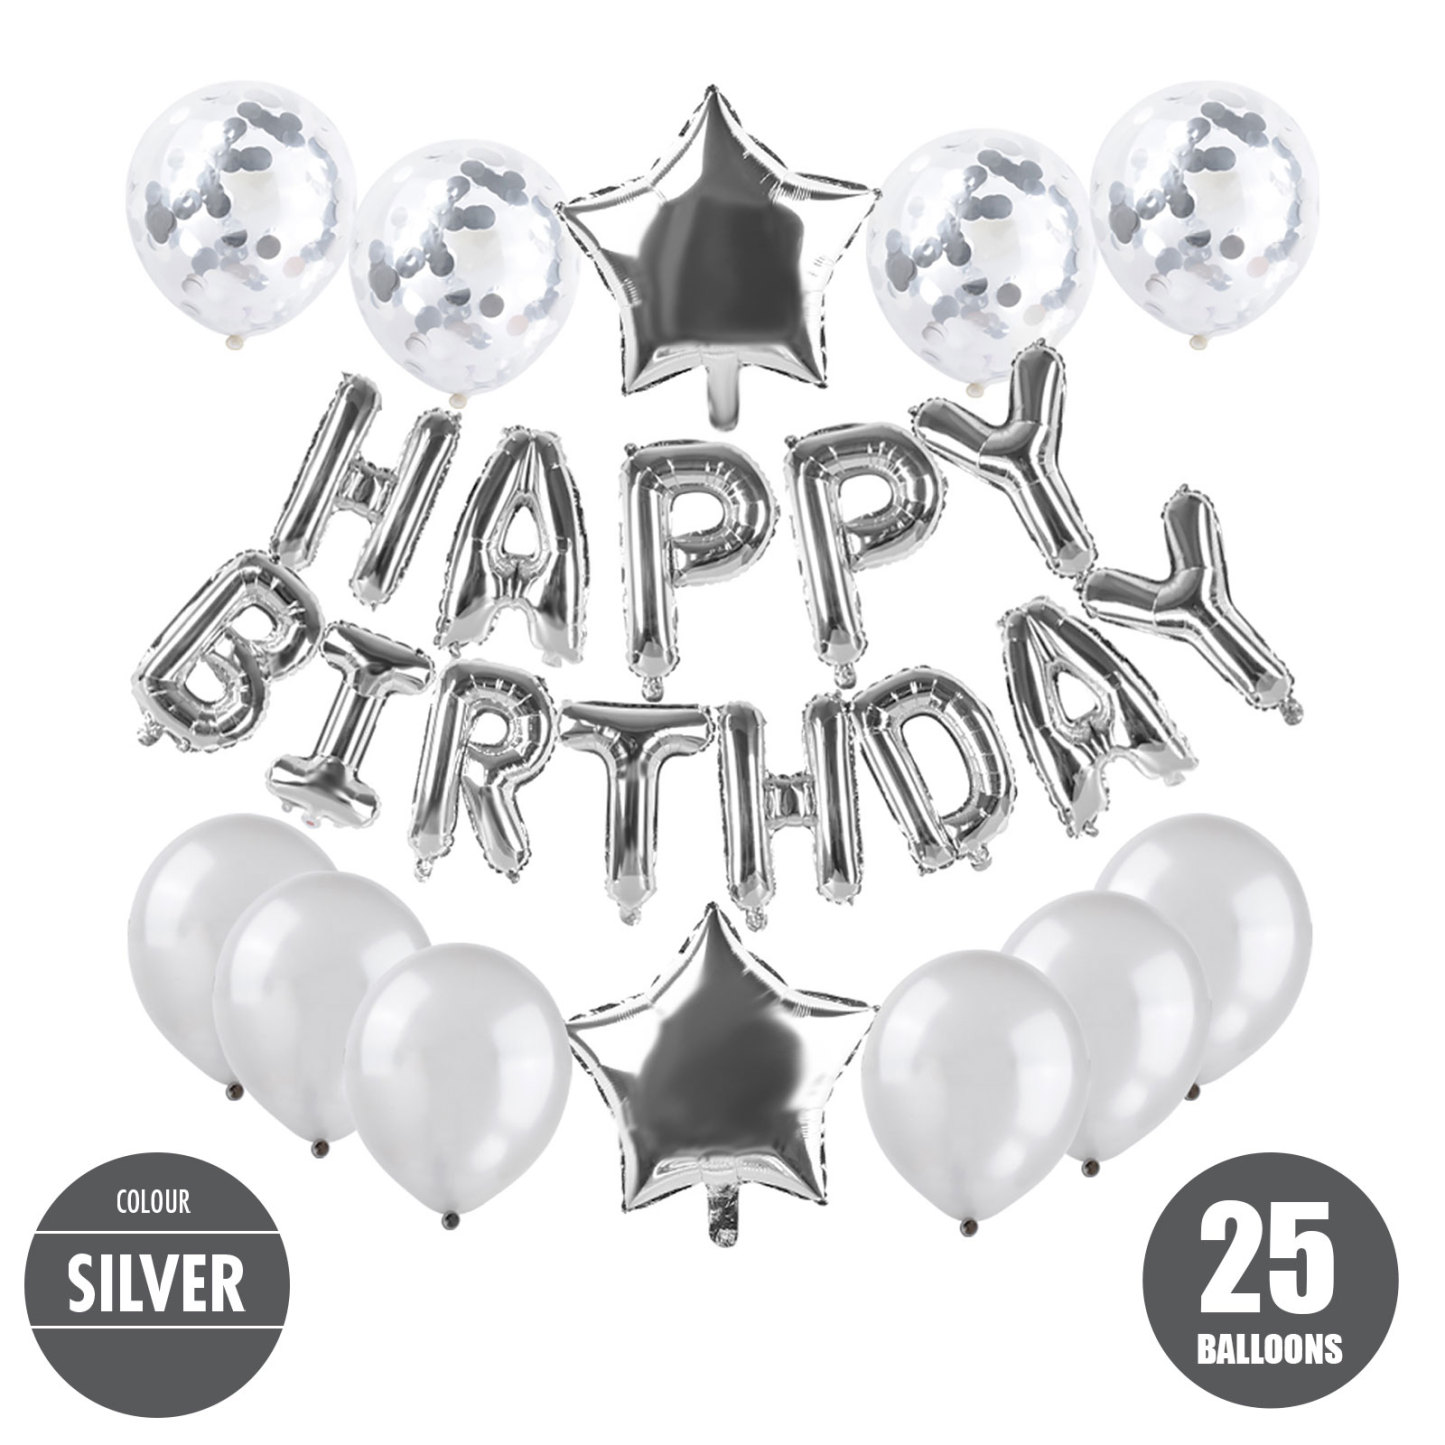 25pcs Happy Birthday Balloon Set (Rose Gold/Silver) - Children | Adult | Party | Decoration